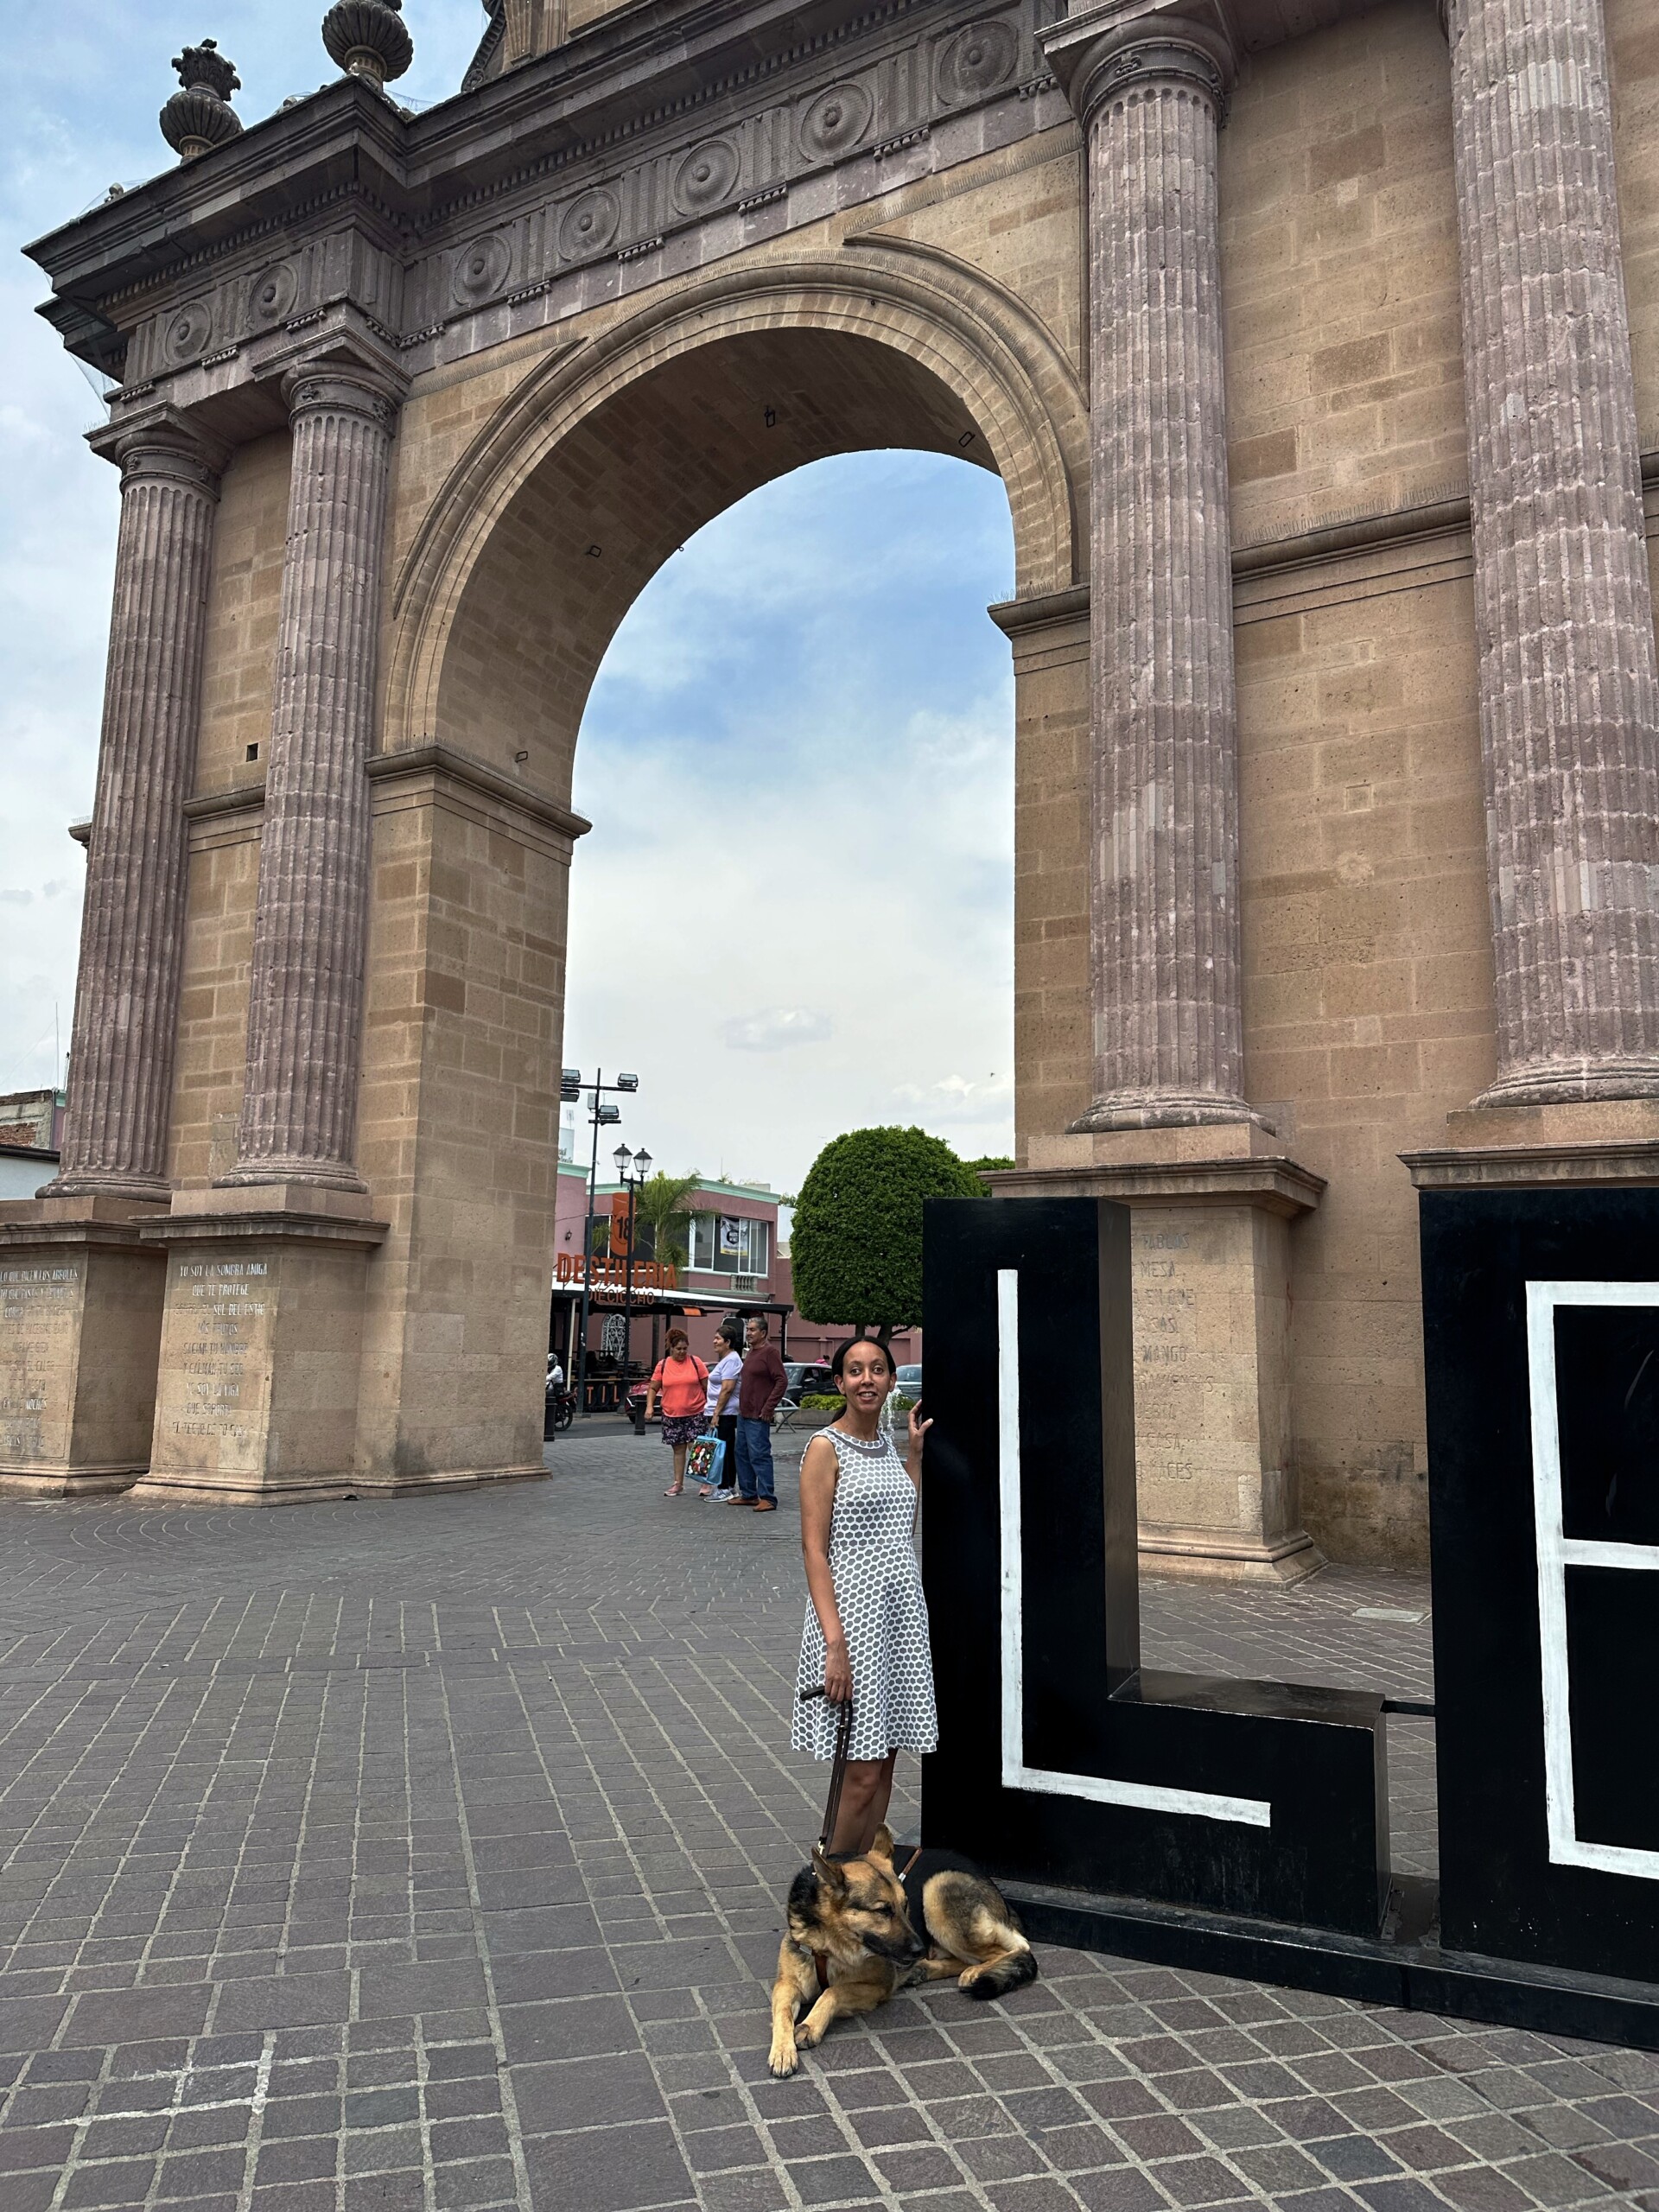 I’m leaning against a large, 3D letter L. An E is next to it, forming the first two letters of the city, Leon. Mylo is lying down on the floor in front of the L, and behind us is a grand stone arch, Arco Triunfal de la Calzada de los Héroes.